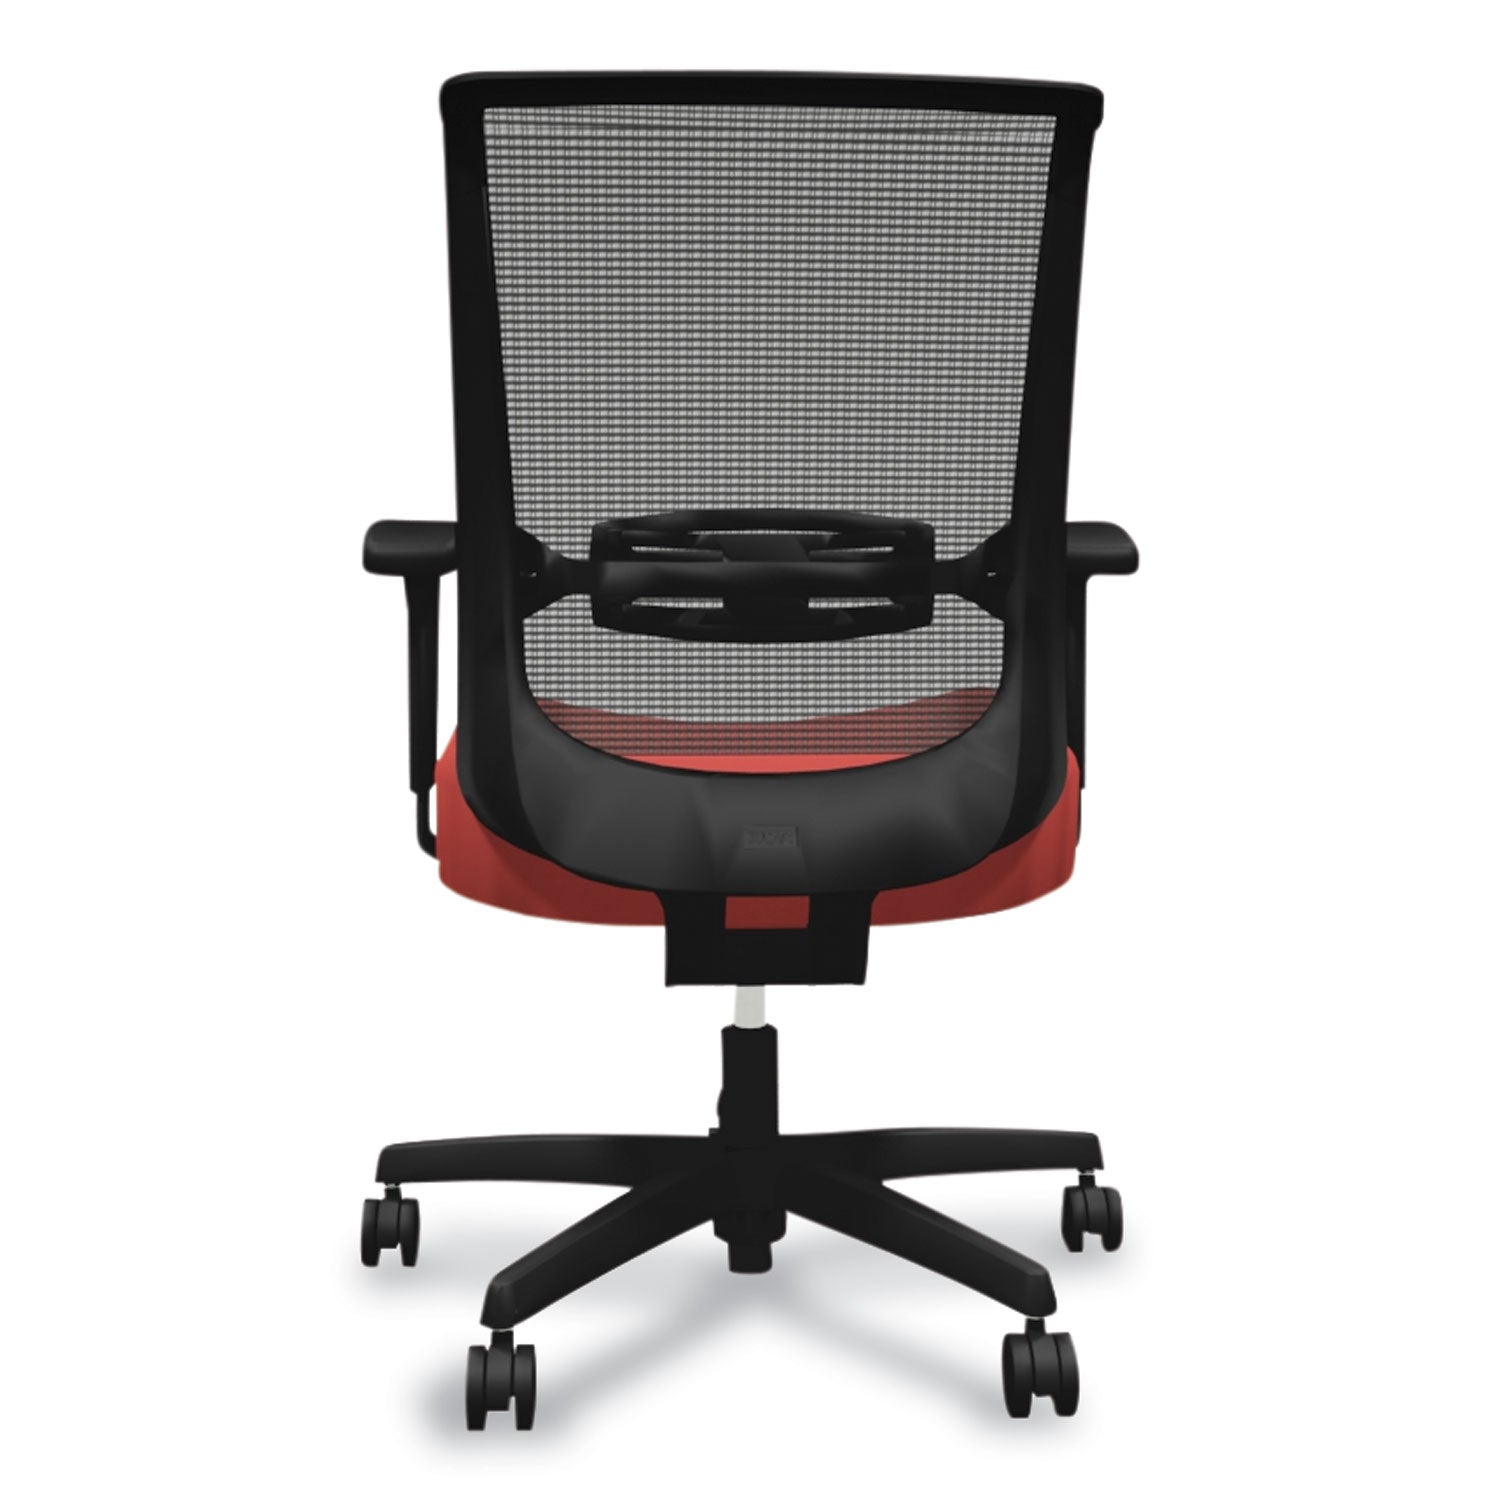 convergence-mid-back-task-chair-swivel-tilt-supports-up-to-275-lb-165-to-21-seat-height-red-seat-black-back-base_honcmz1acu67 - 4